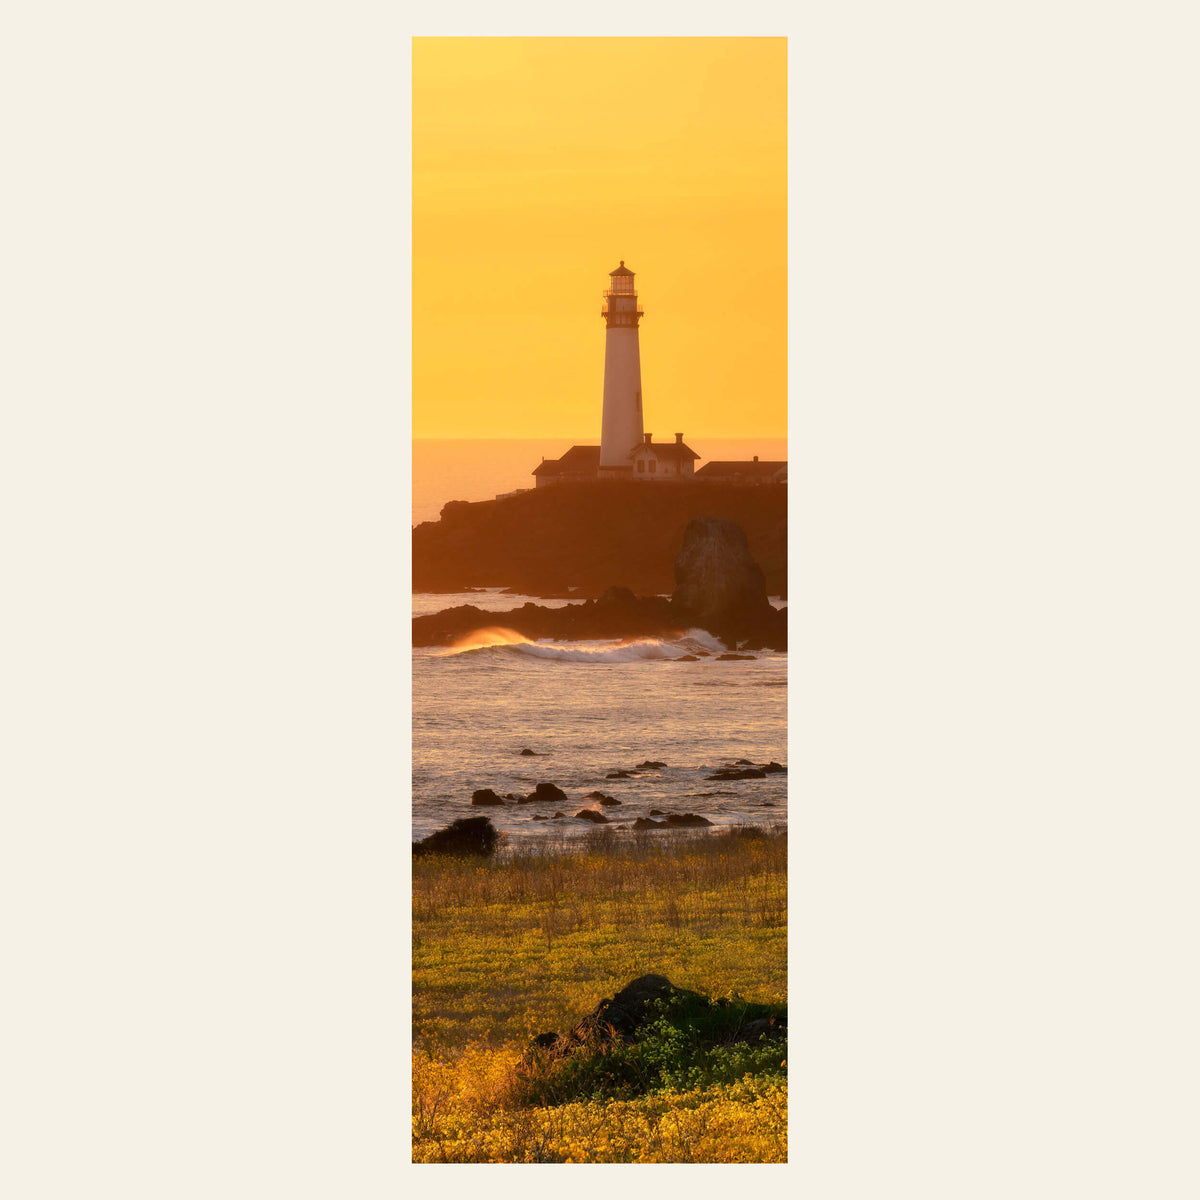 A sunset picture from Pigeon Point Lighthouse in Northern California.